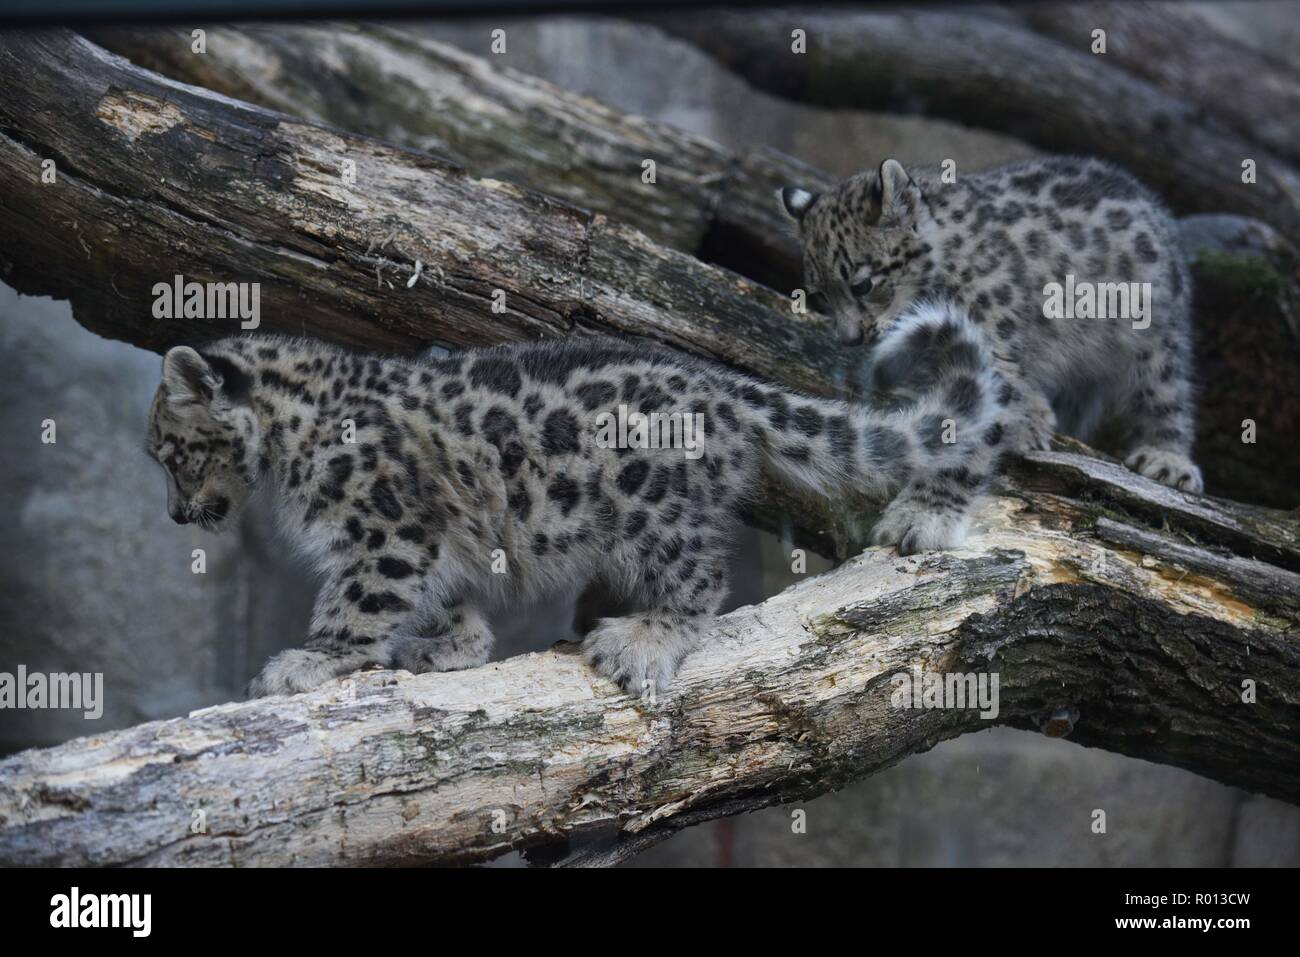 October 26, 2018 - Paris, France: Snow leopards at the zoo of the French National Museum of Natural History. Des jeunes pantheres des neiges a la menagerie du Jardin des Plantes. *** FRANCE OUT / NO SALES TO FRENCH MEDIA *** Stock Photo